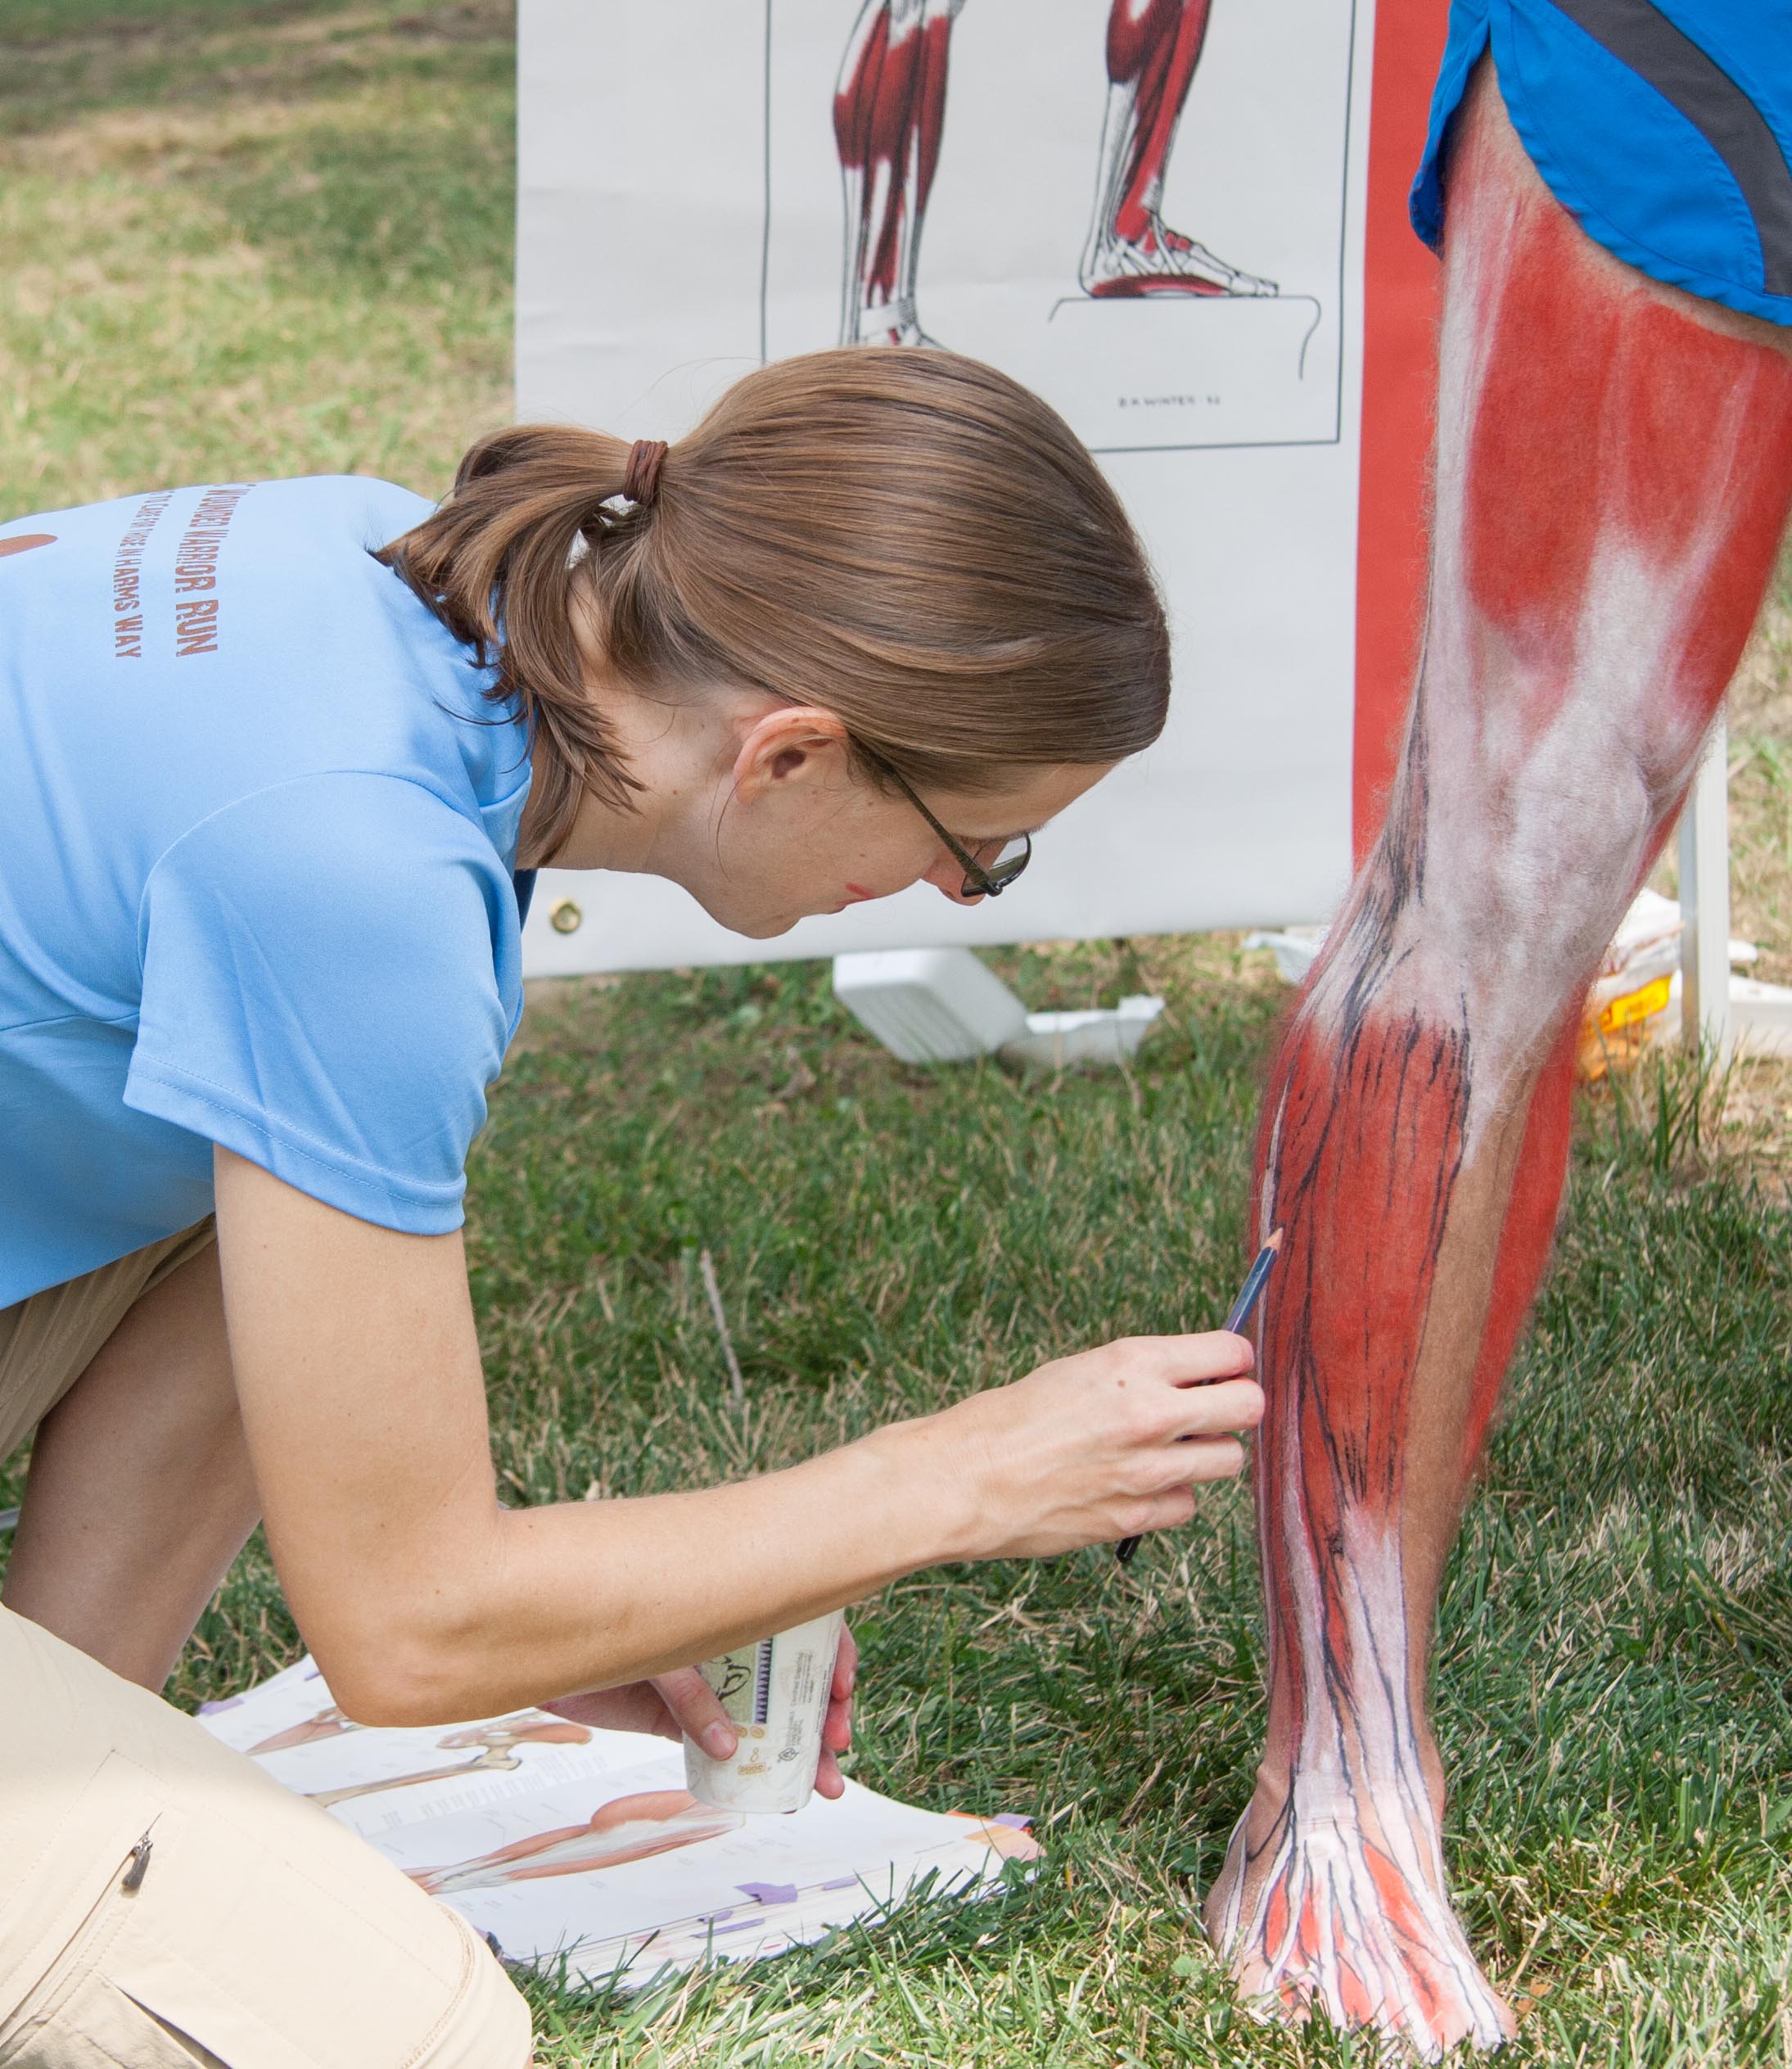 Elizabeth Weissbrod, an HJF employee working as a medical illustrator with the Uniformed Services University Val G. Hemming Simulation Center, highlights the muscles of the leg and foot as part of the Anatomy of Sports program held on August 9, 2014 at the National Museum of Health and Medicine (NMHM) in Silver Spring, Md.